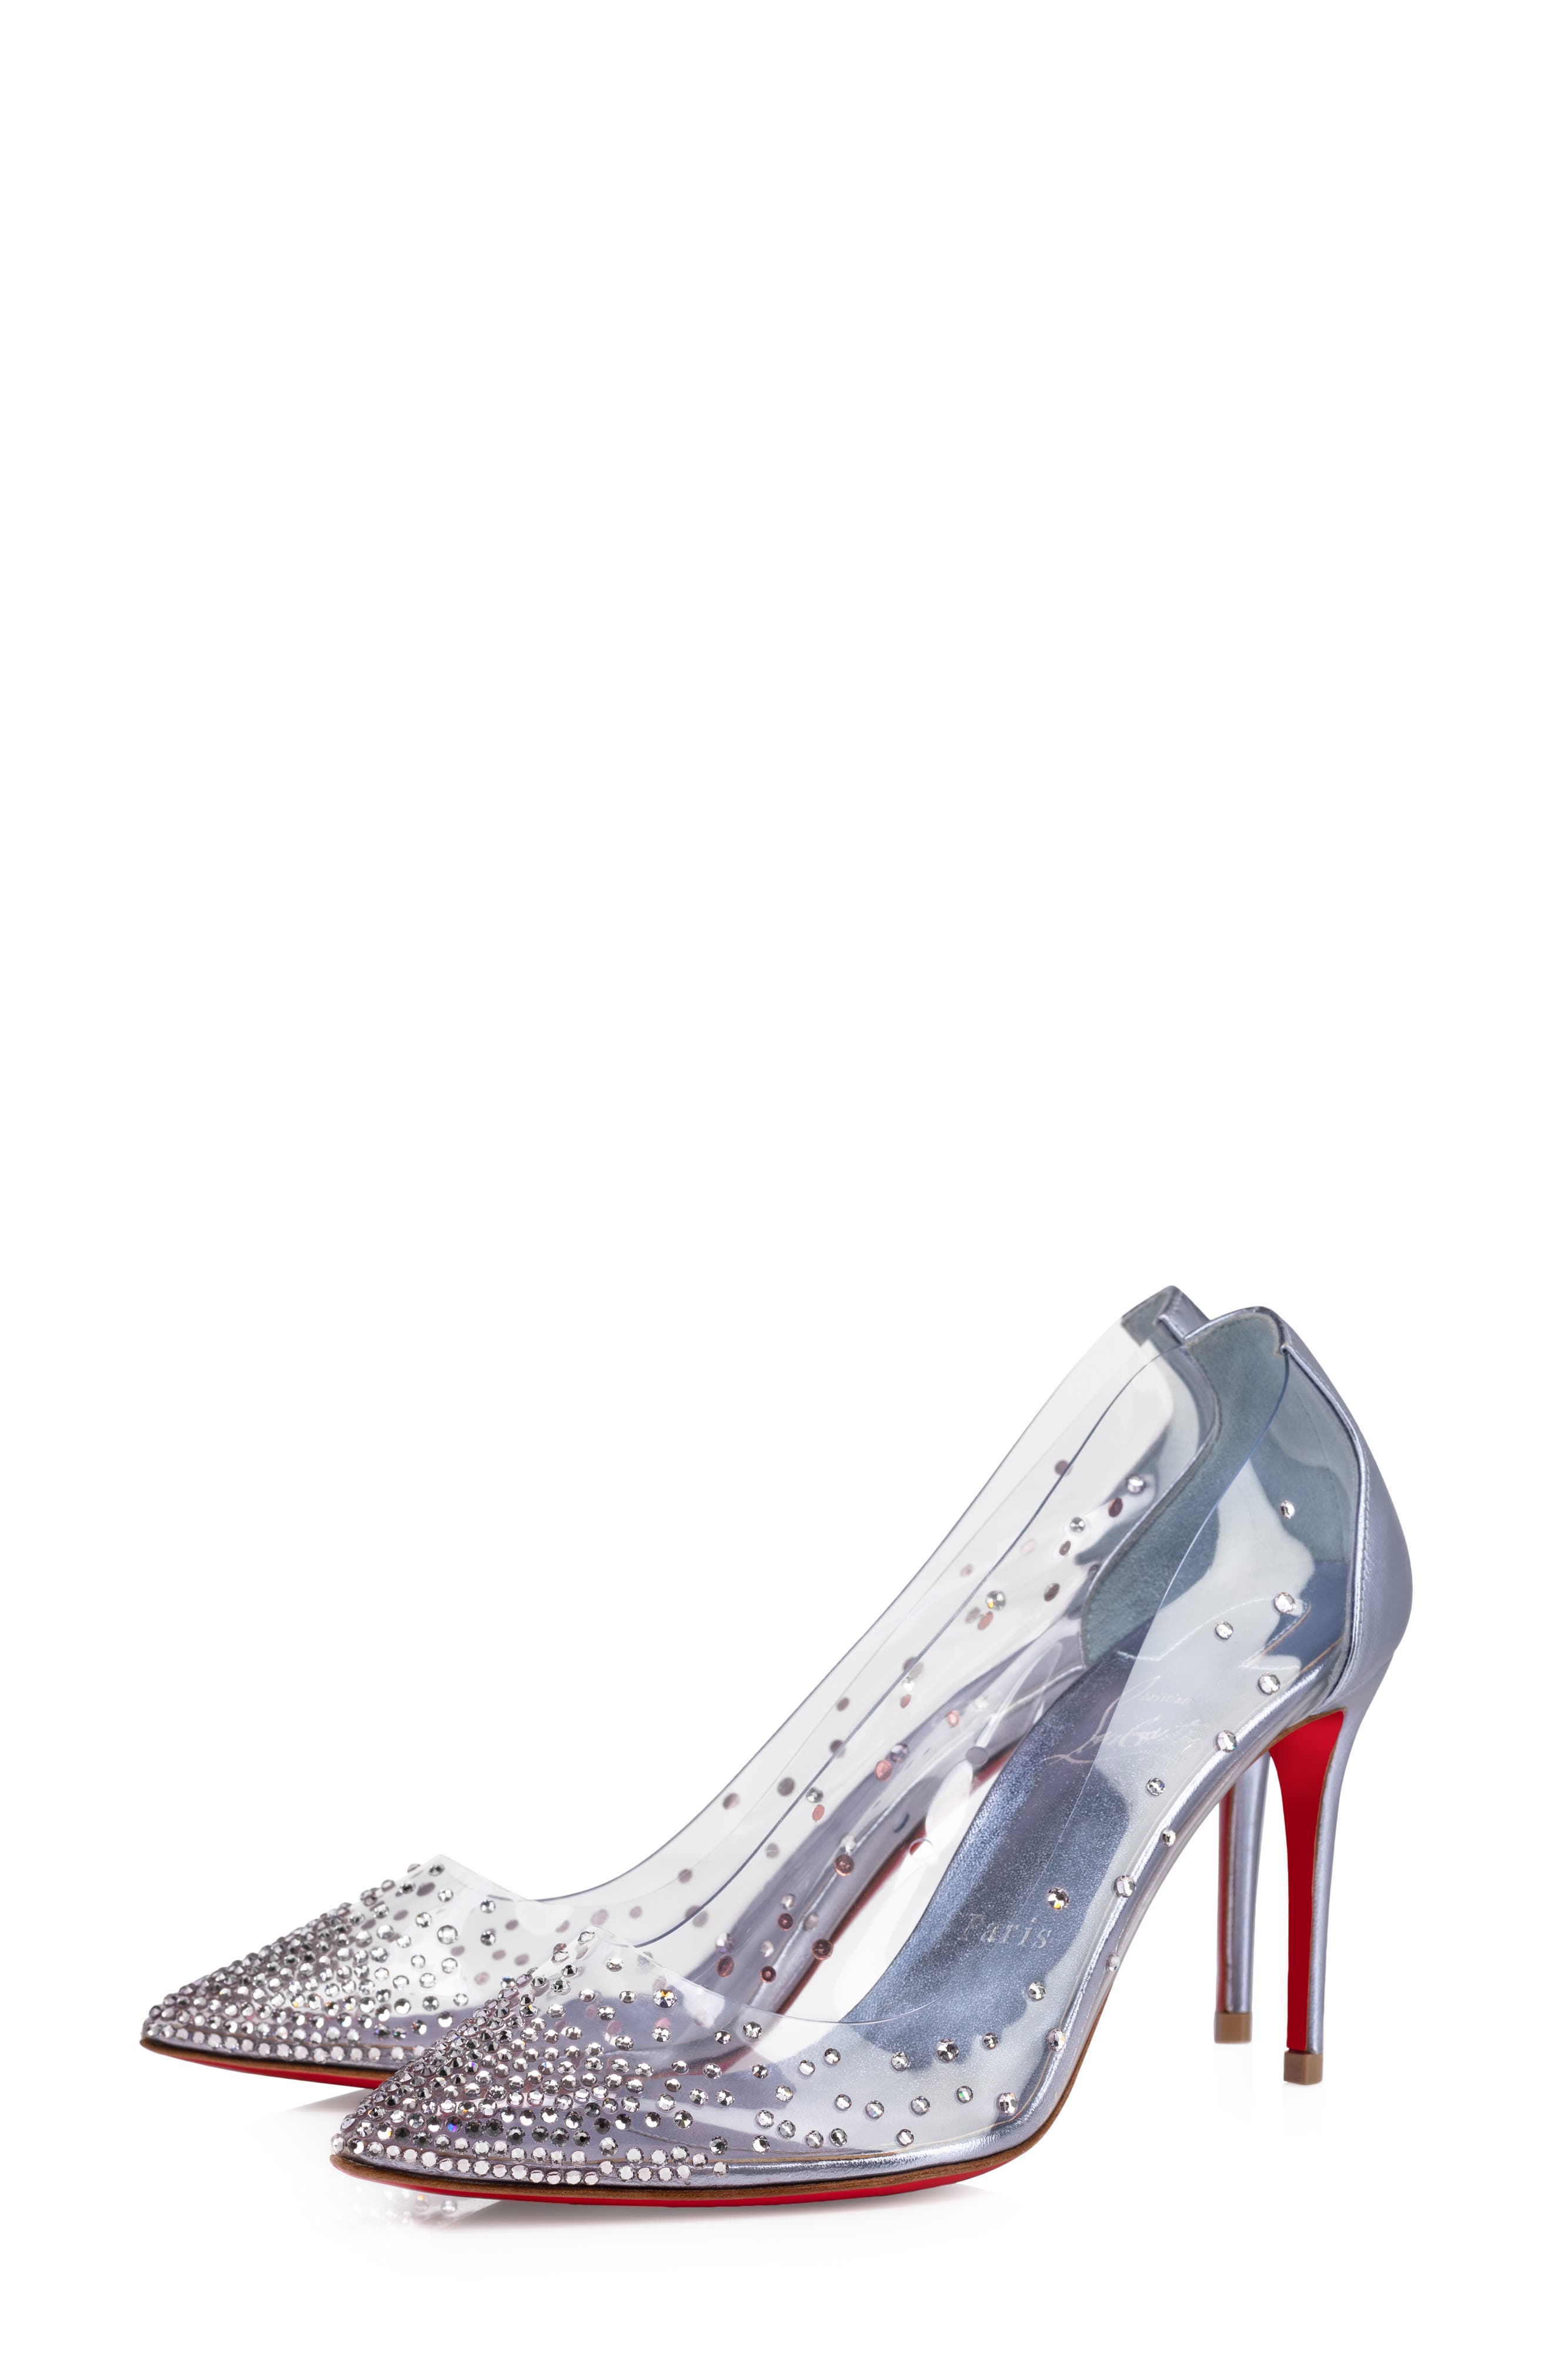 Christian Louboutin Degrastrass Pointed Toe Pump in Greek at Nordstrom, Size 10.5Us